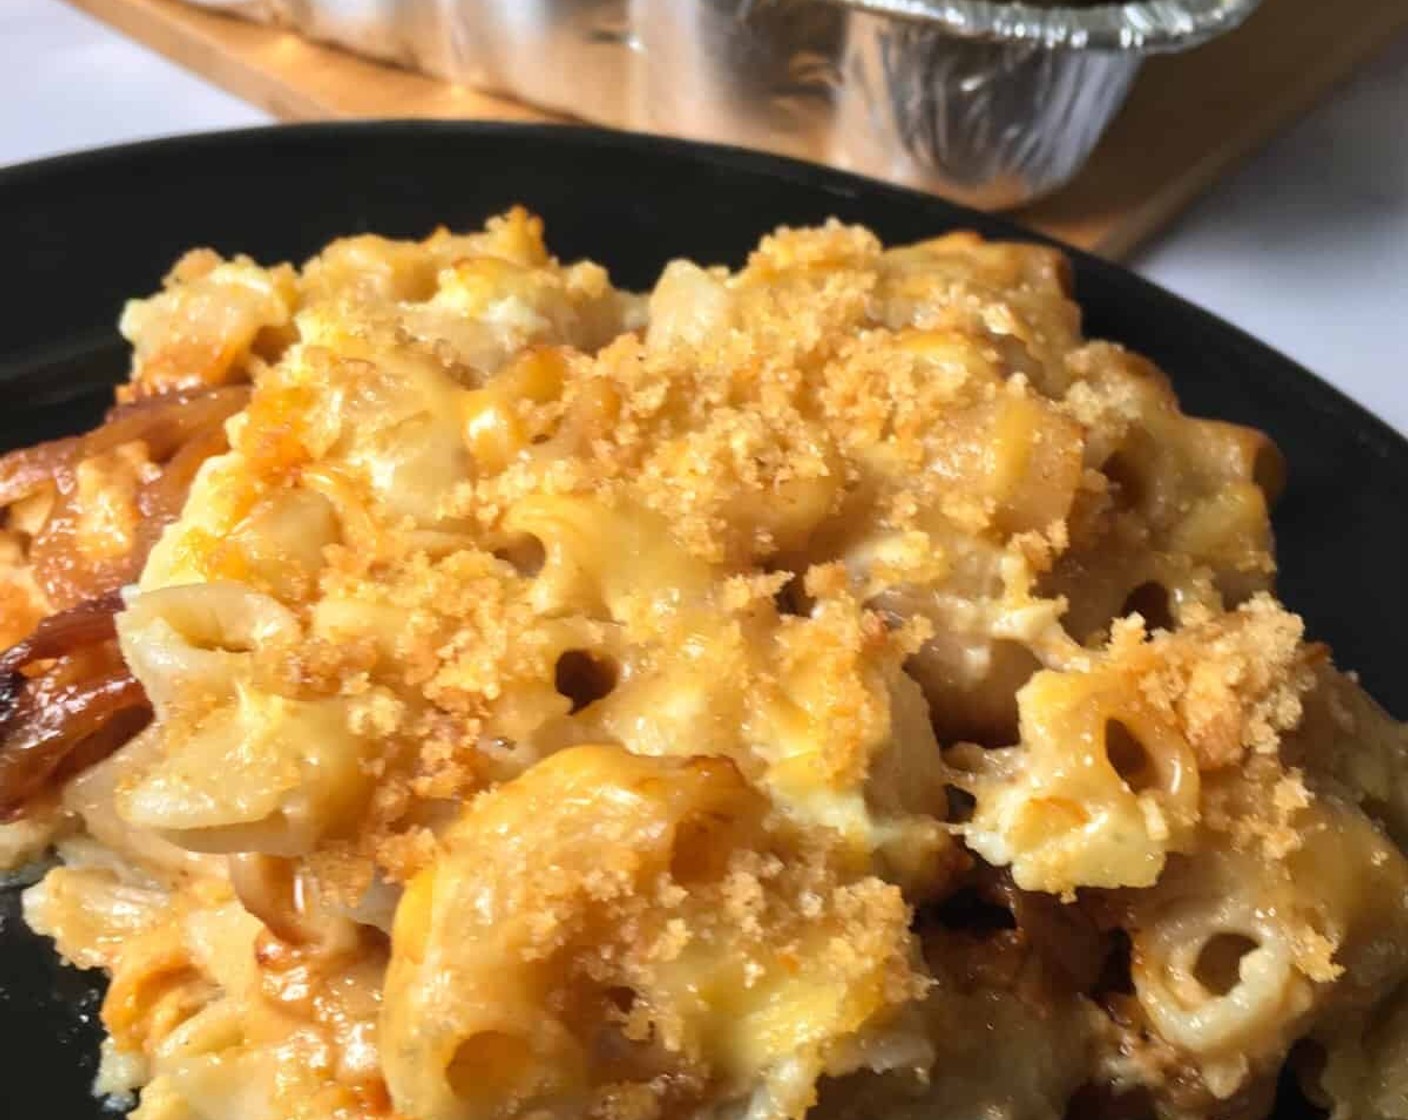 Smoked Mac and Cheese with Gouda and Caramelized Onions